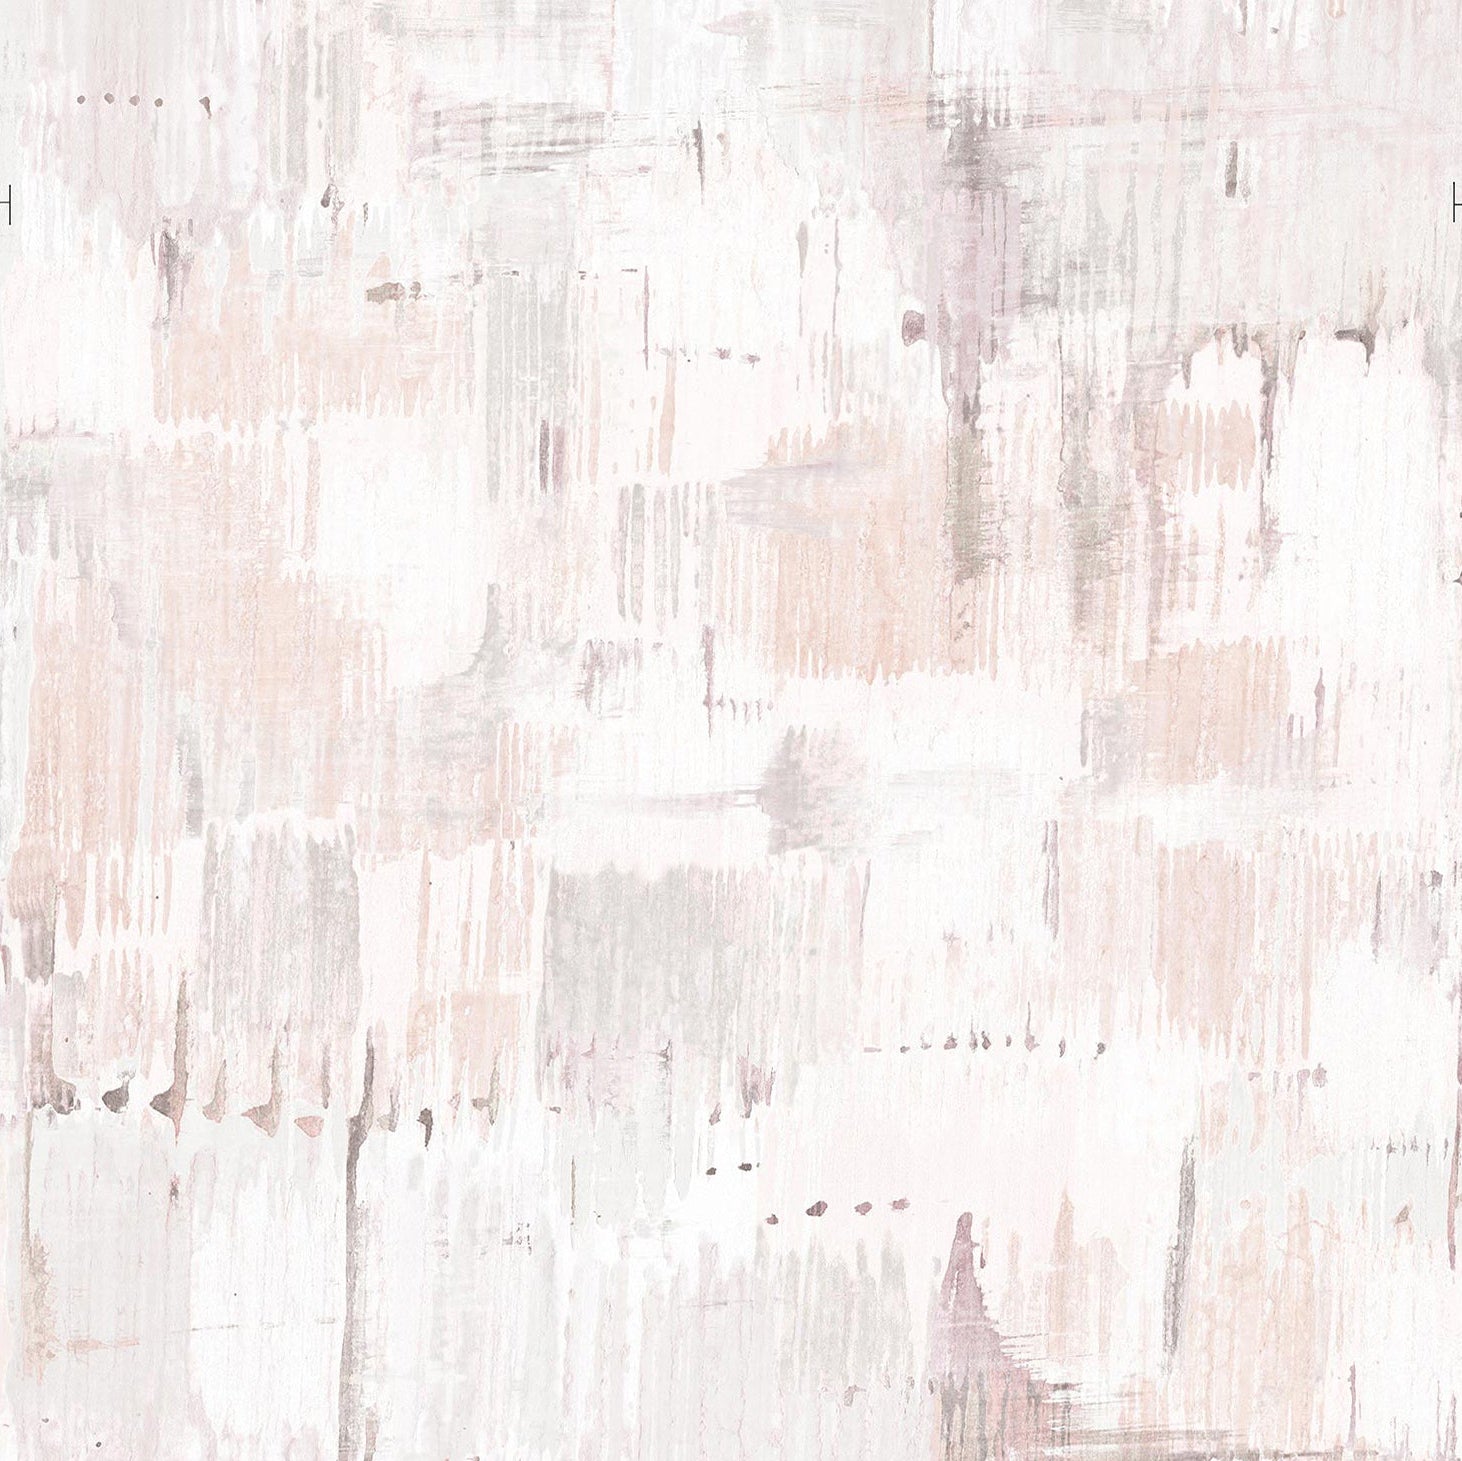 Detail of wallpaper in an abstract textural print in shades of pink, cream and tan.